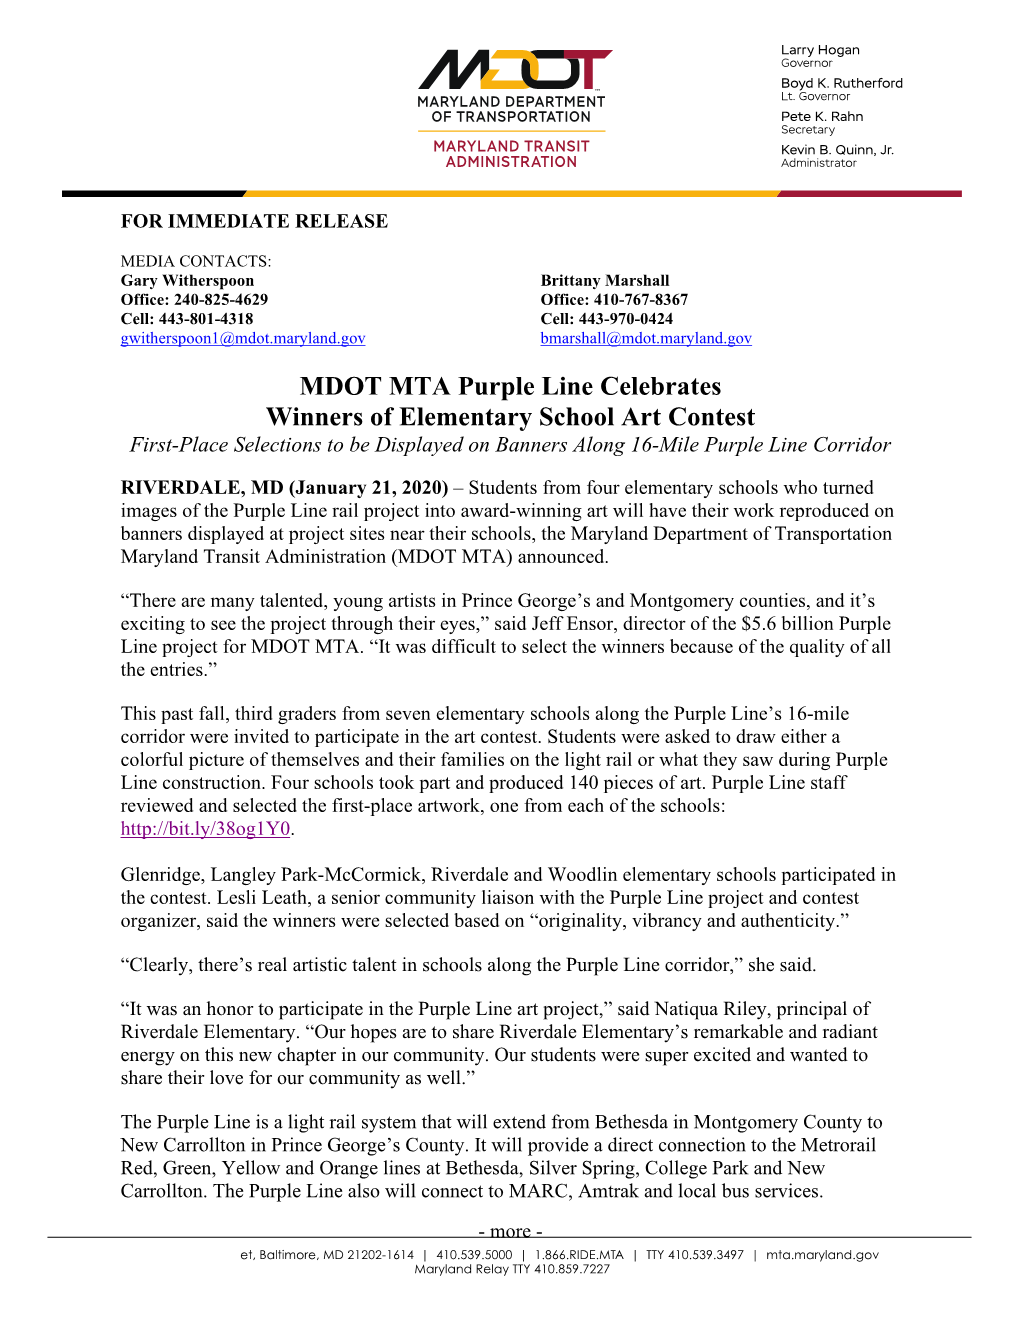 MDOT MTA Purple Line Celebrates Winners of Elementary School Art Contest First-Place Selections to Be Displayed on Banners Along 16-Mile Purple Line Corridor